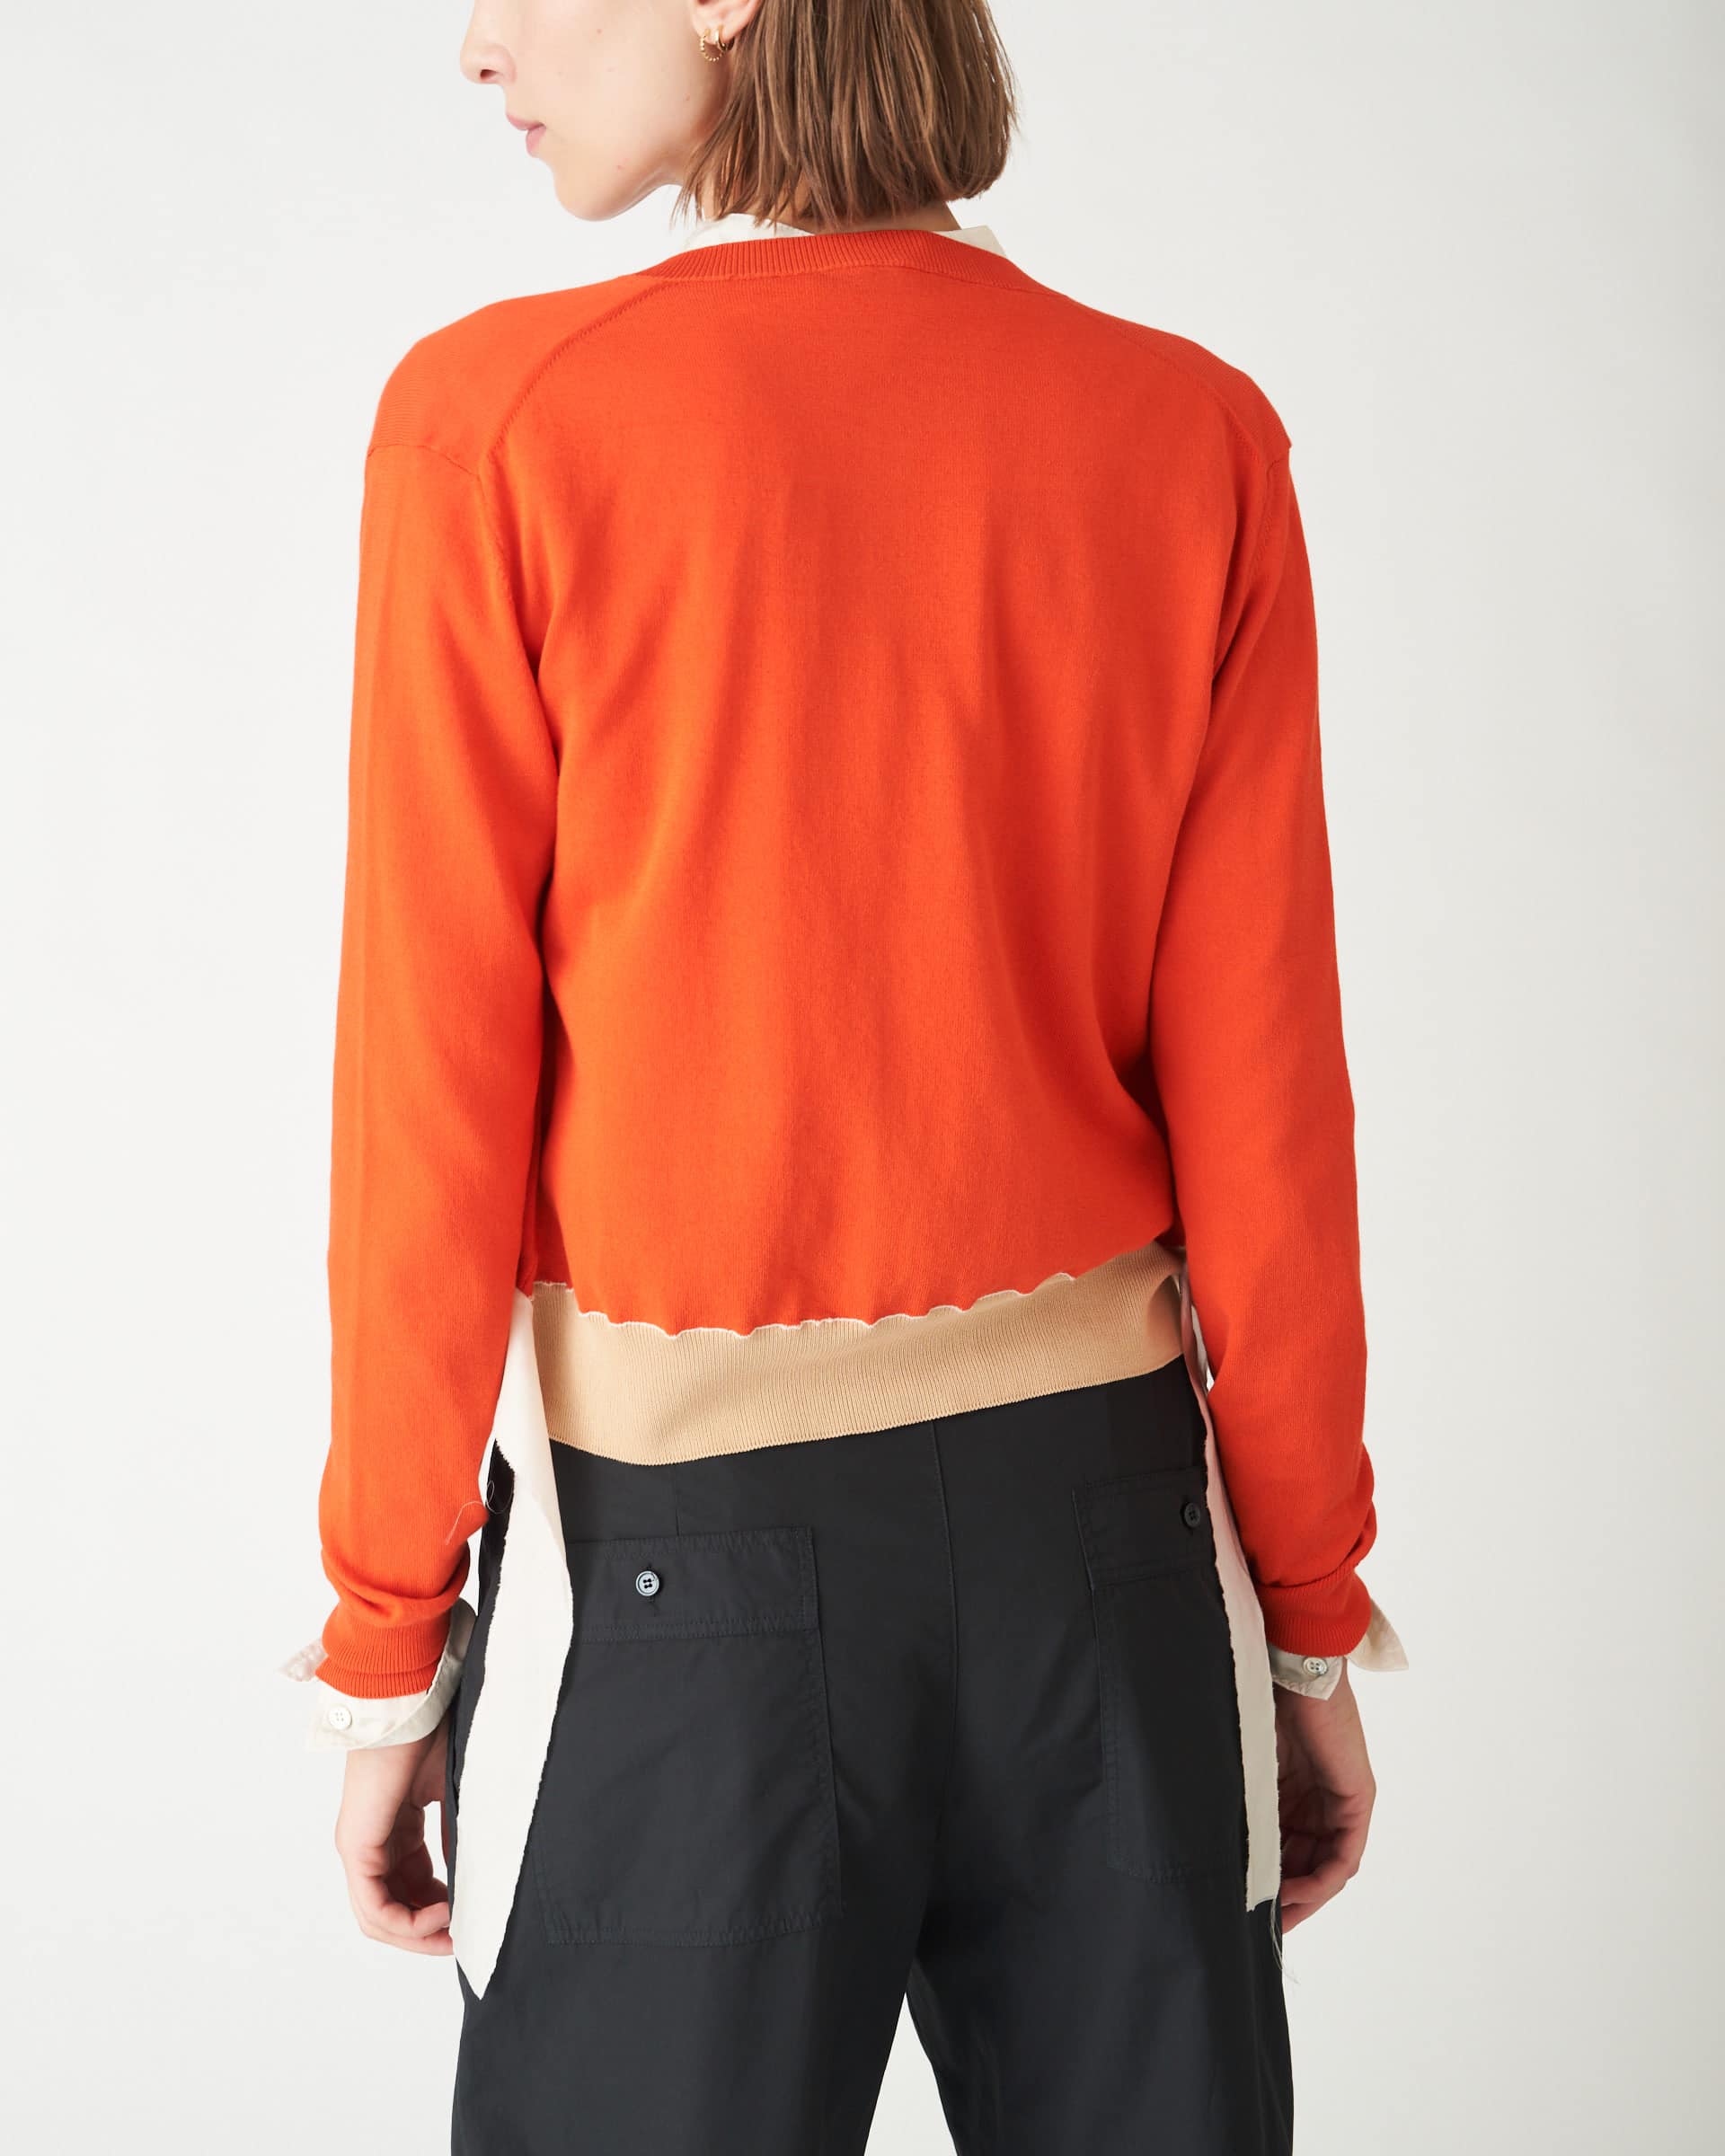 The Market Store | Jacket With Silk Details